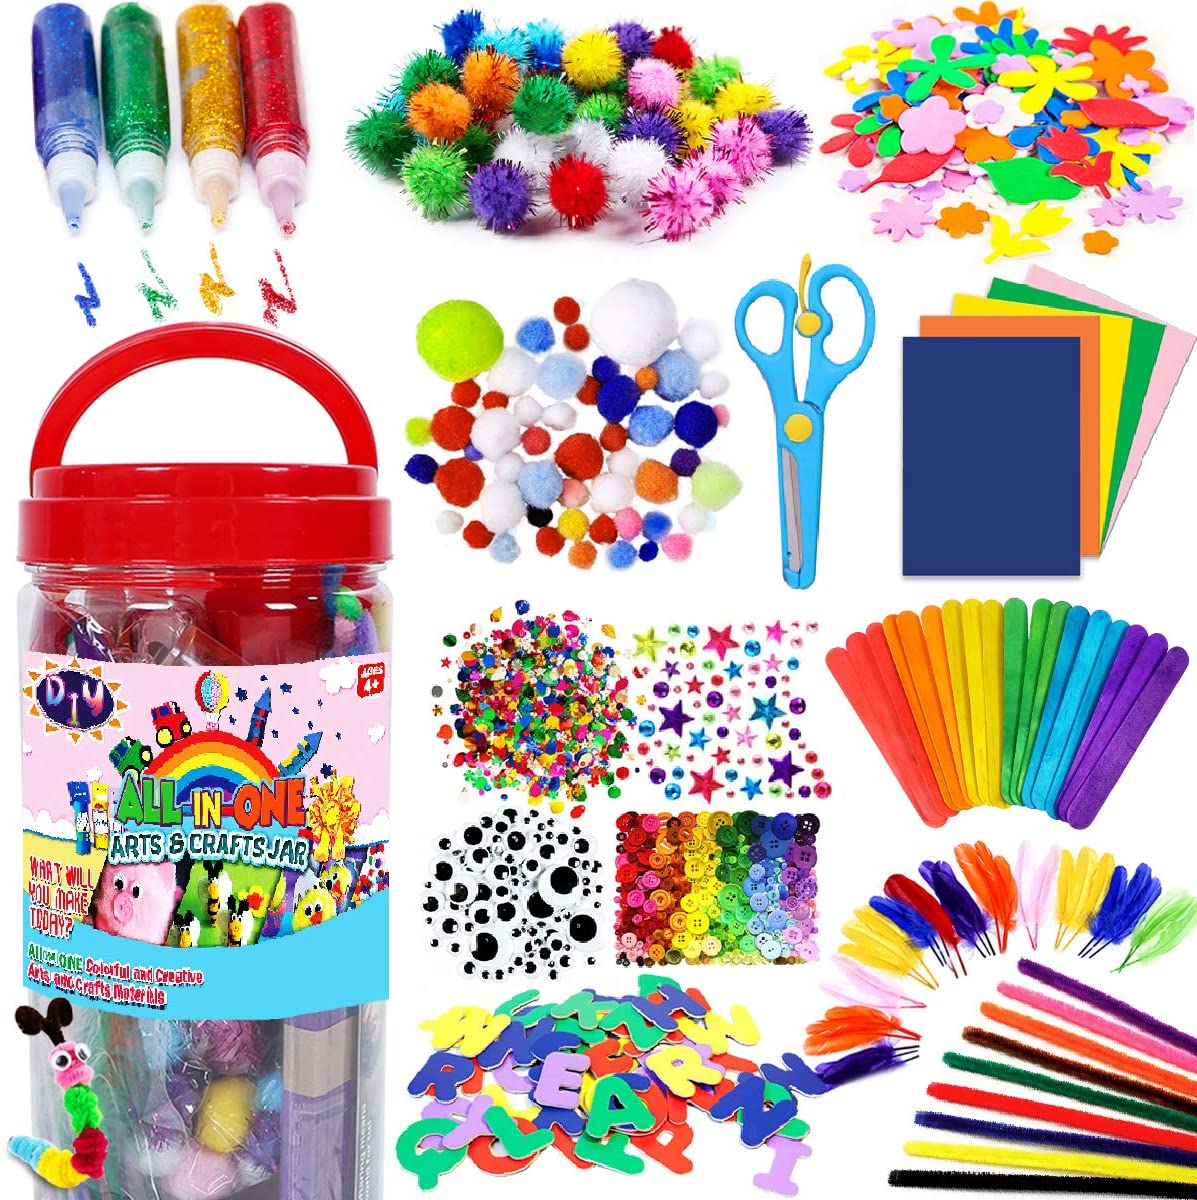  BB Bachmore Mega Kids Art Supplies Jar – Over 700 Pieces of  Colorful and Creative Arts and Crafts Materials - Glue, Safety Scissors,  Pompoms, Popsicle Sticks, Pipe Cleaners and Loads More 